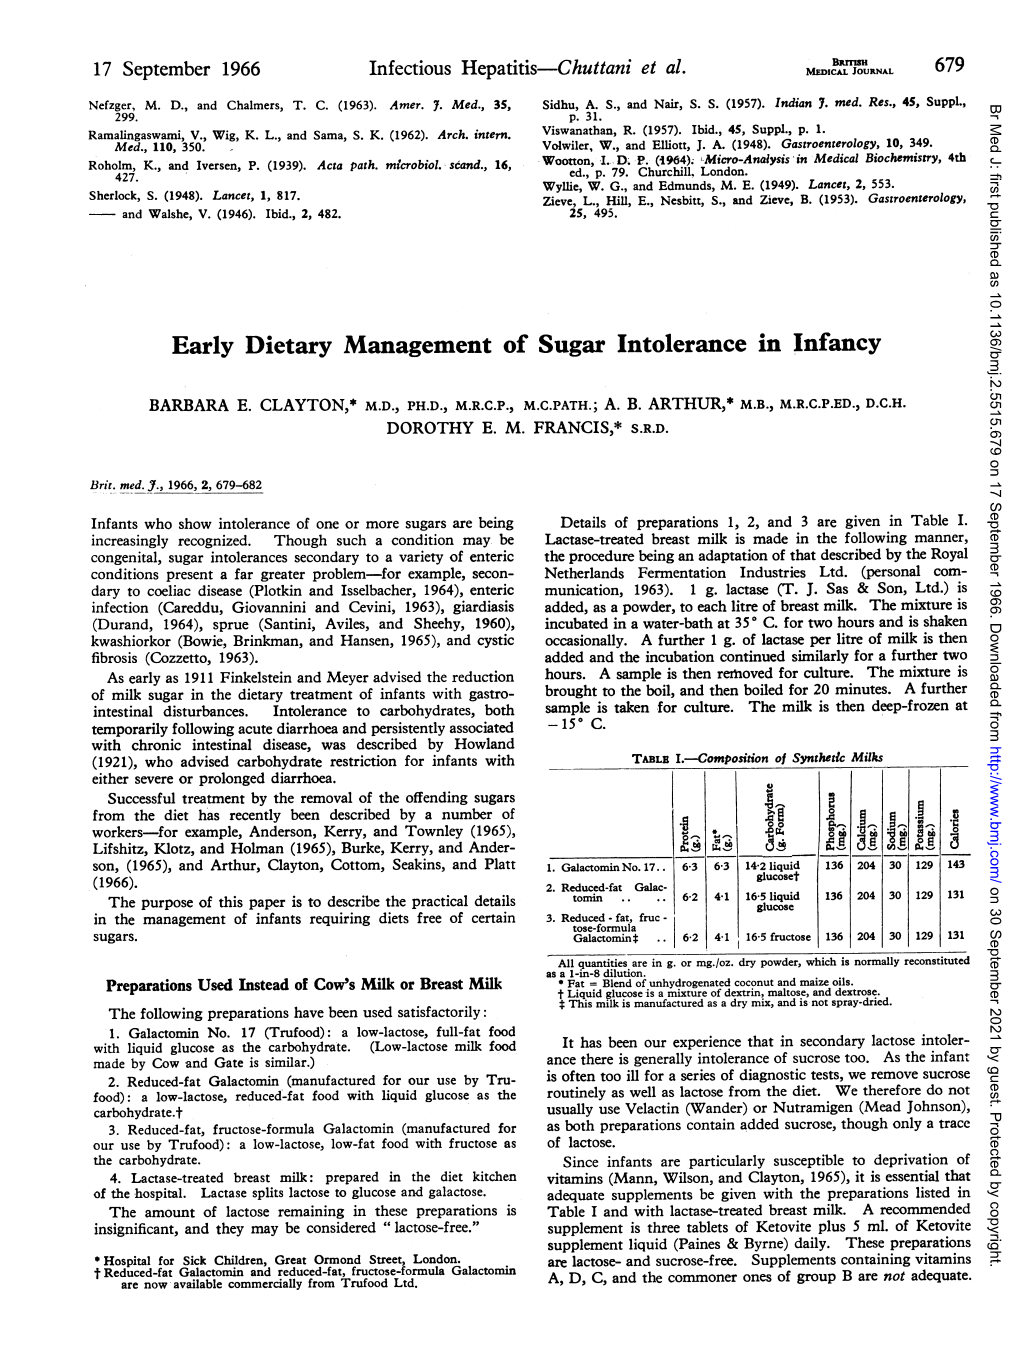 Early Dietary Management of Sugar Intolerance in Infancy